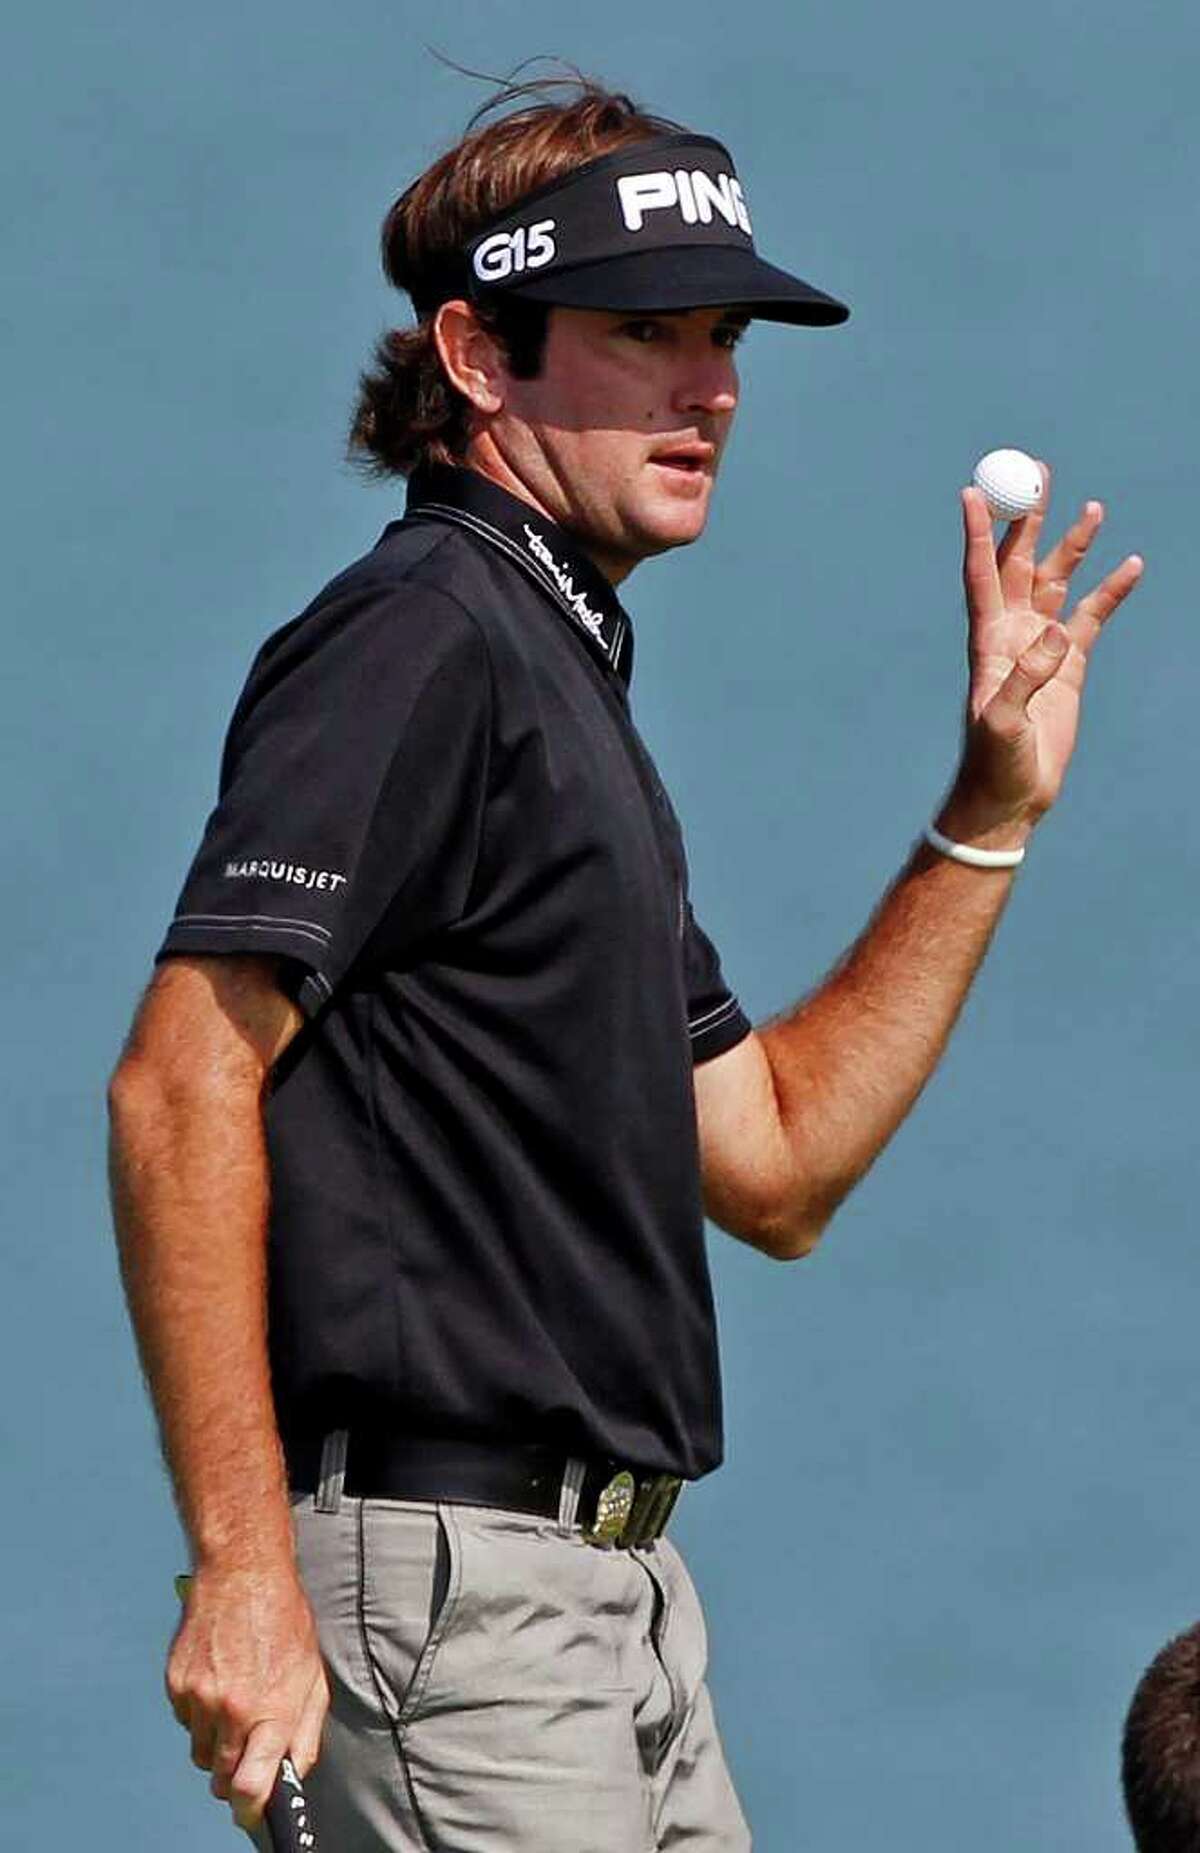 Bubba Watson reacts after making a birdie putt on the 16th hole during the first round of the PGA Championship golf tournament Thursday, Aug. 12, 2010, at Whistling Straits in Haven, Wis. (AP Photo/Jeffrey Phelps)